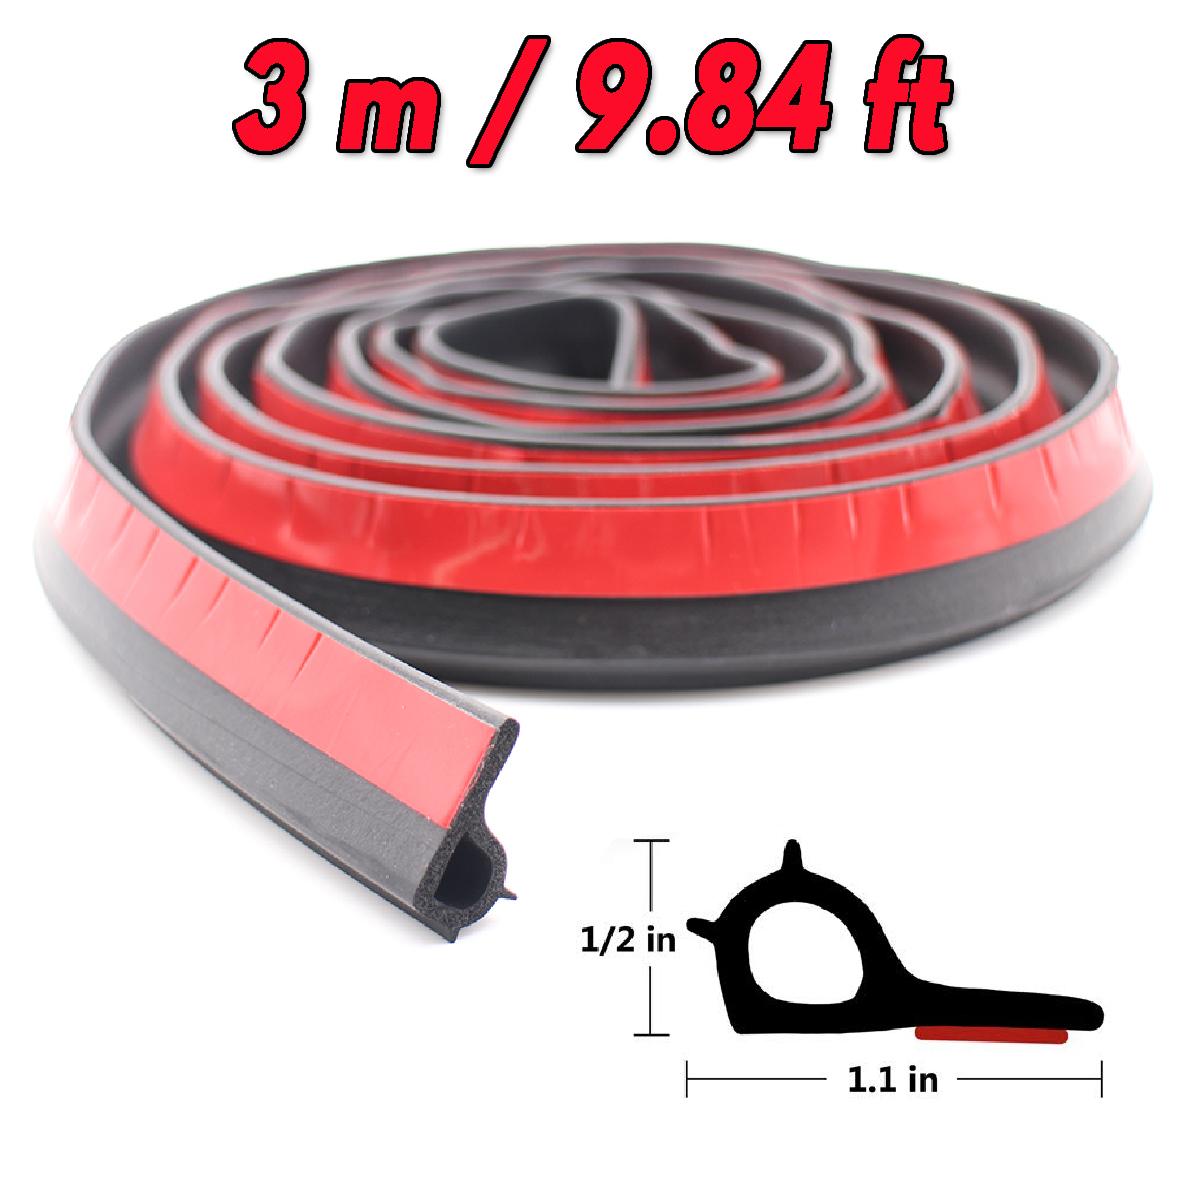 3-Meters-Universal-TAILGATE-Sealing-Strip-Seal-Kit-for-TOYOTA-HILUX-SR5-SR-RUBBER-UTE-Dust-Tall-Gate-1575669-2